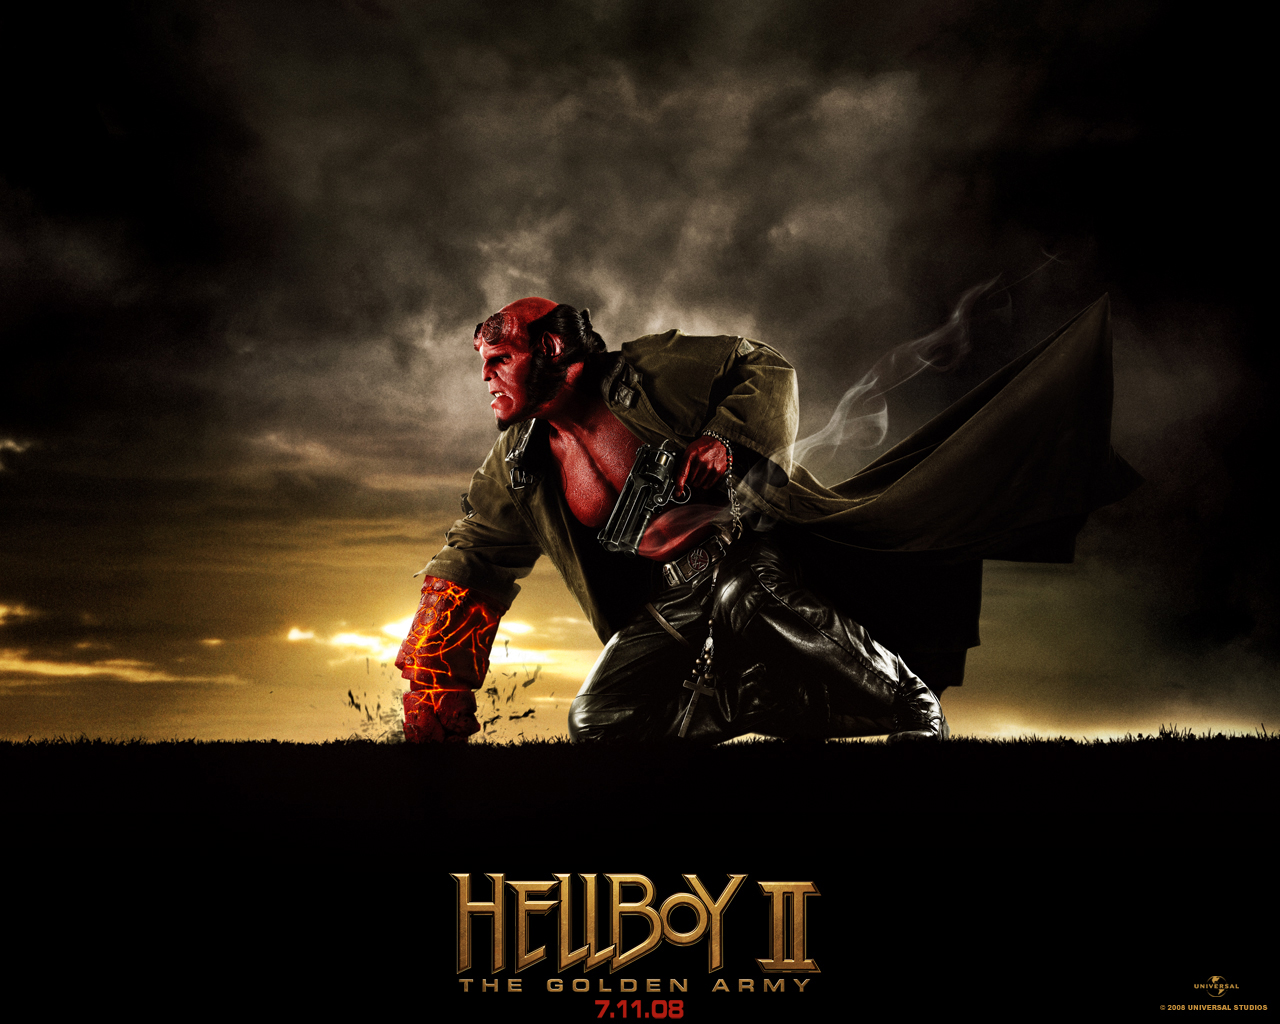 Download HQ Hellboy 2 The Golden Army wallpaper / Movies / 1280x1024